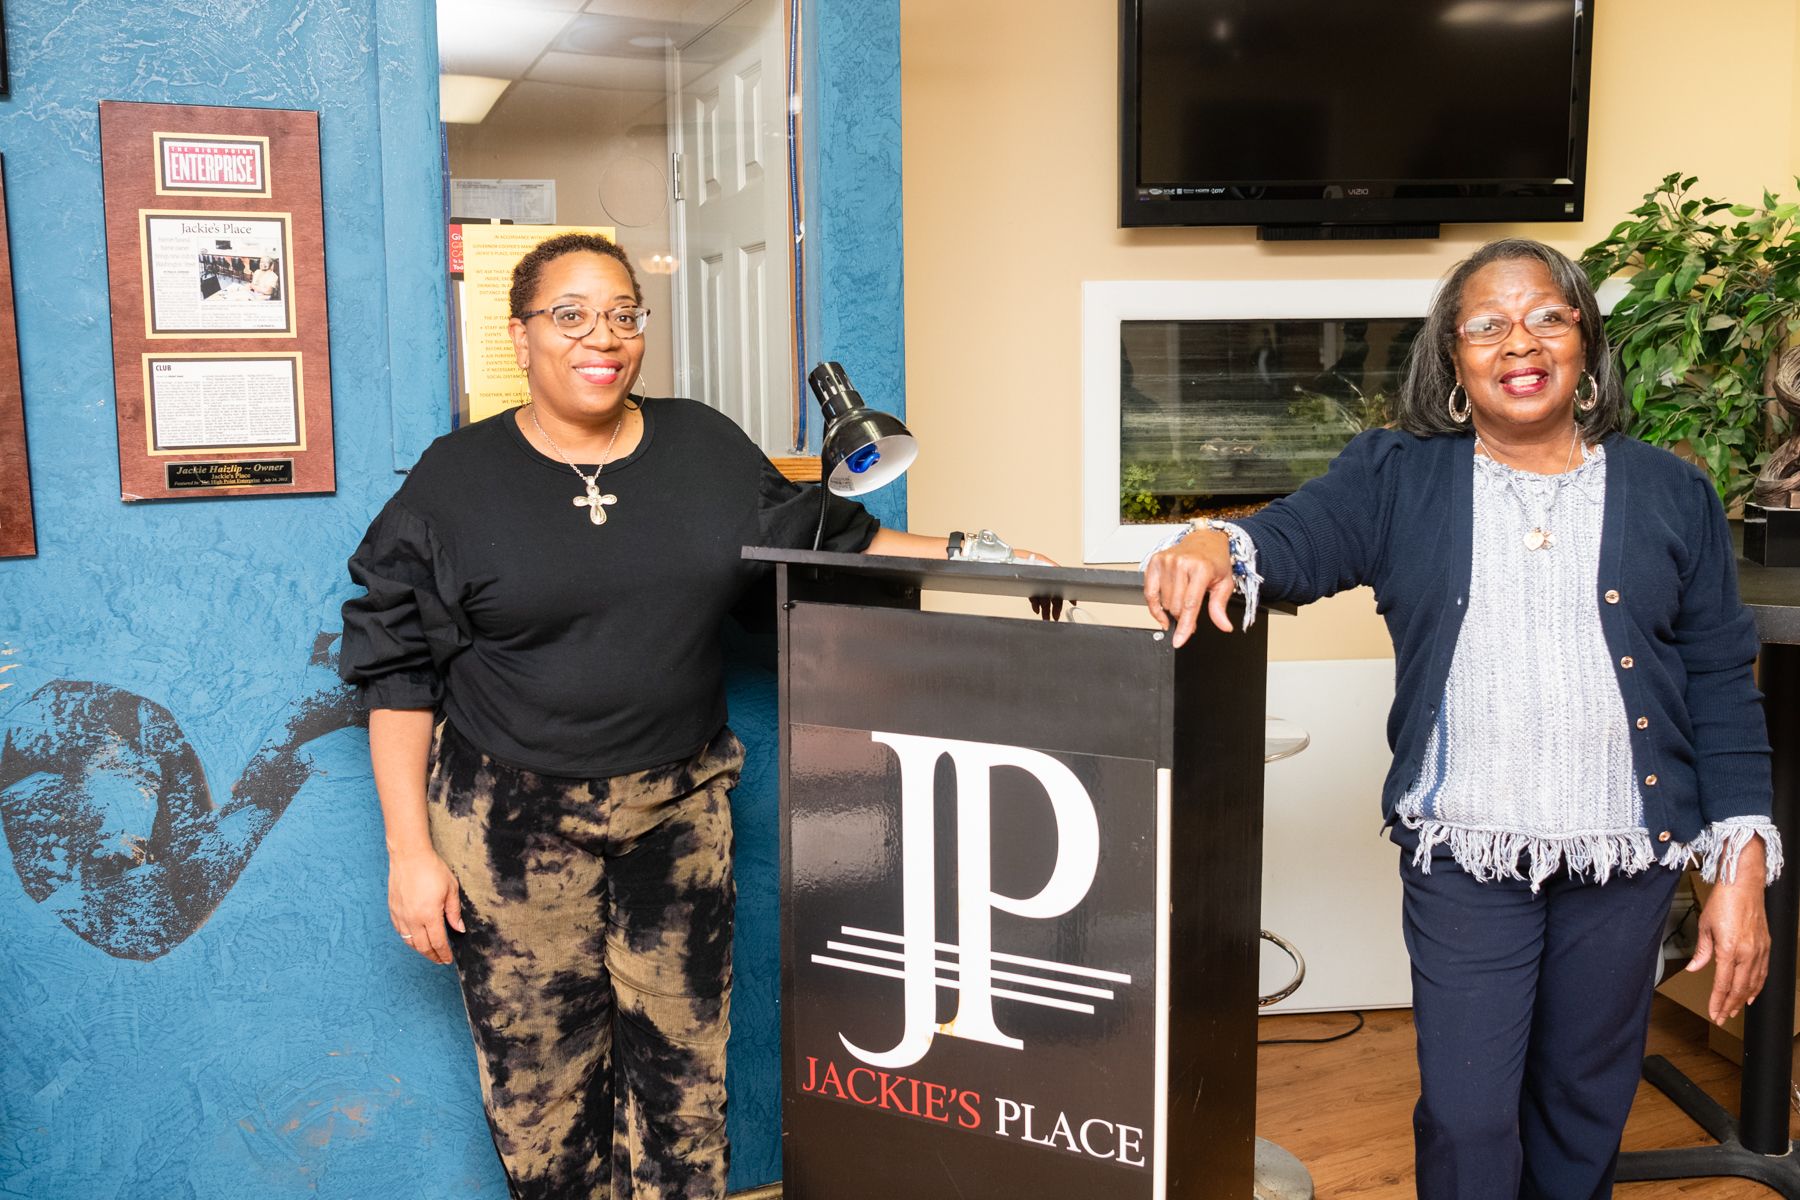 Rishaunda Moses and Raynetta Jackson stand in front of the welcome podium at Jackie's Place in High Point, NC.